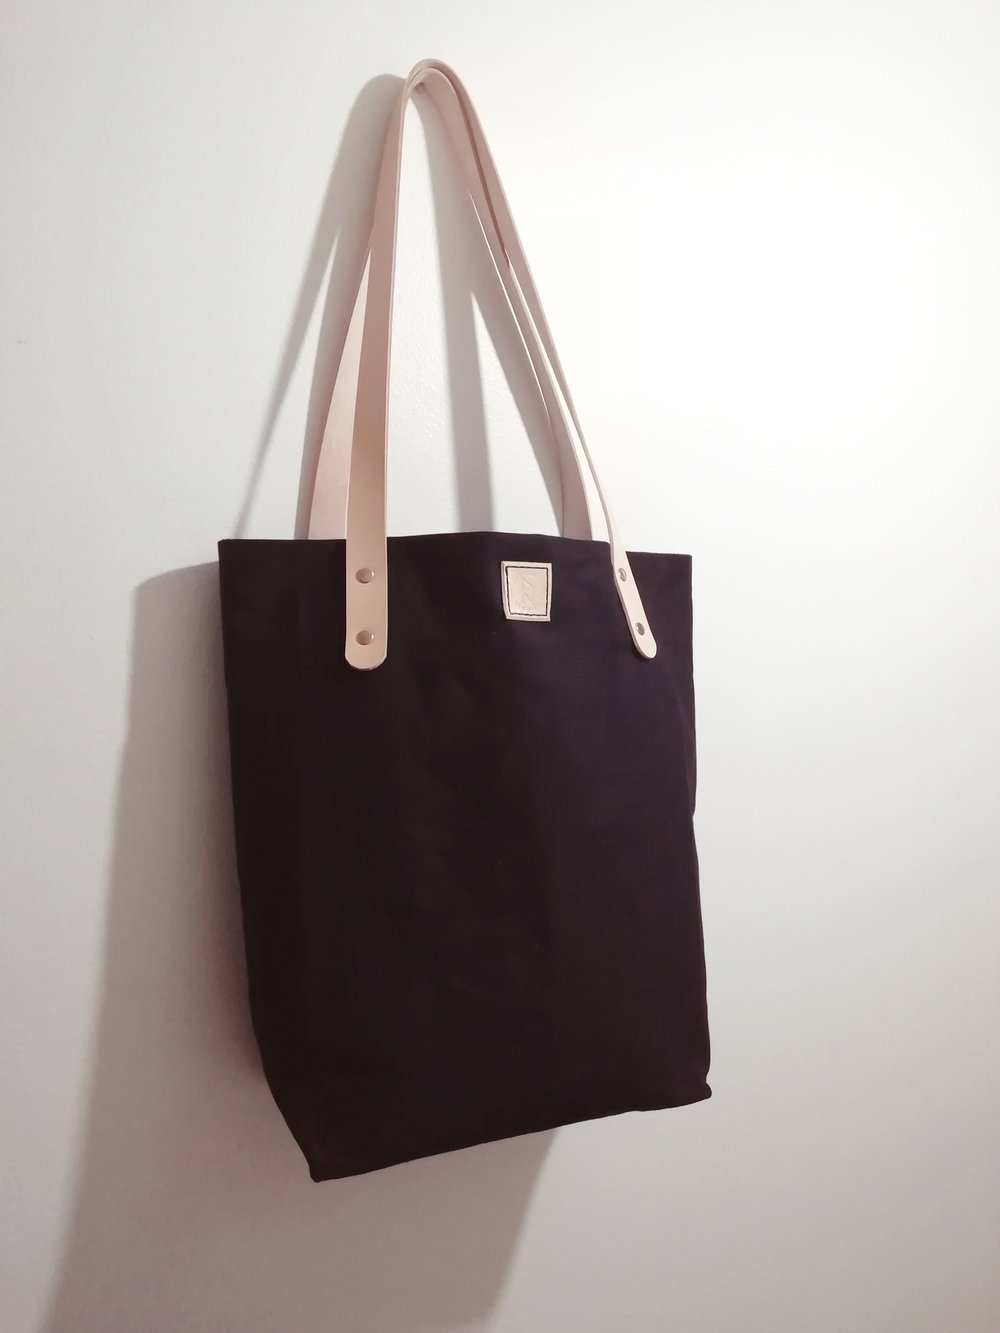 Image of Canvas tote